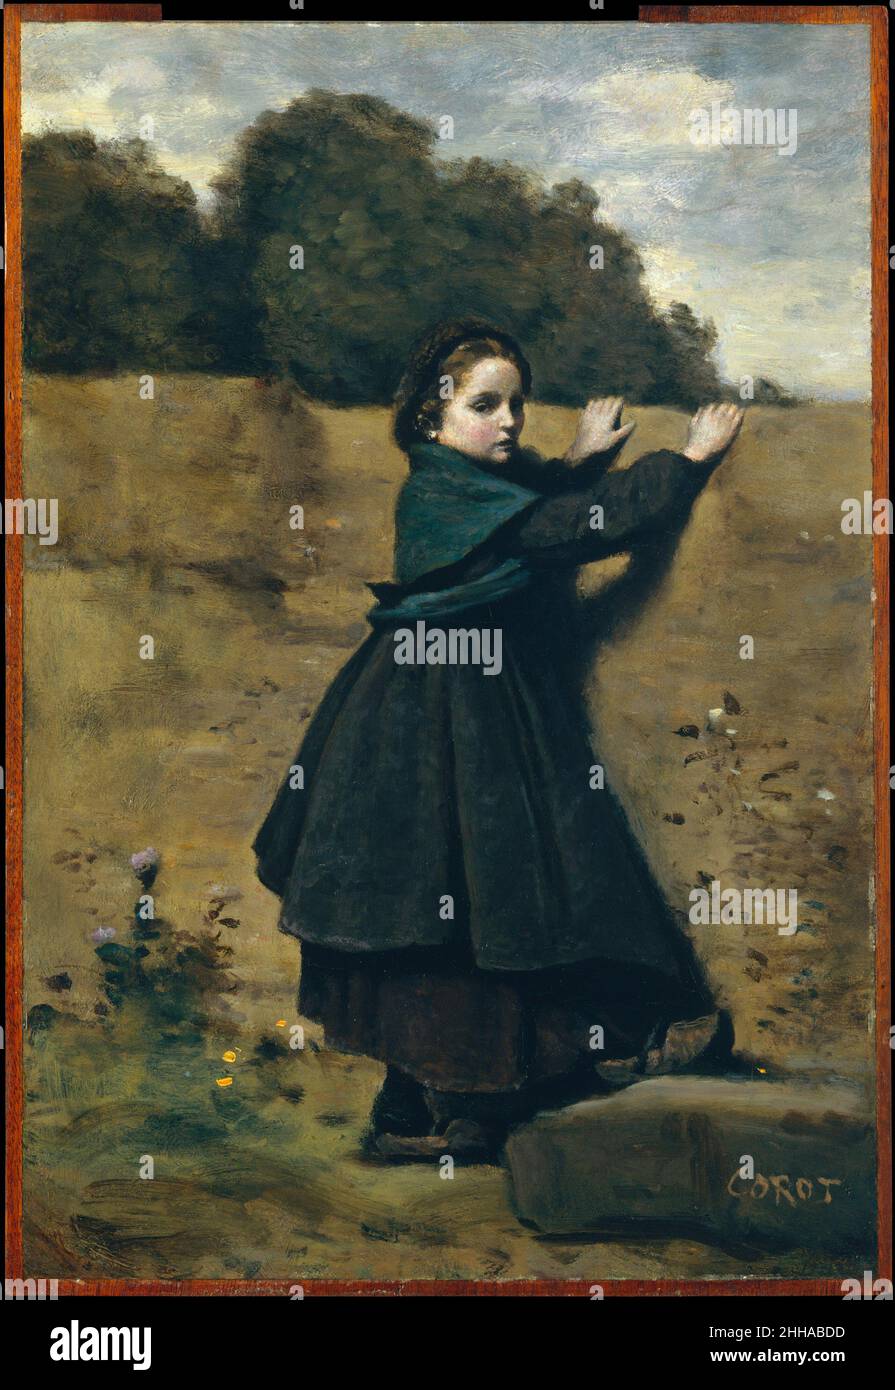 The Curious Little Girl 1860–64 Camille Corot French Although Corot’s celebrity rests on his landscapes, his contemporaries were partial to his figure paintings, especially scenes drawn from contemporary life that he made toward the end of his career. Appreciated for their unaffected grace and serenity—what the French critics called naïveté—these works were eagerly sought by collectors. Corot’s friends recalled that he looked forward to painting them as a refreshing break from routine. The girl depicted here resembles Emma Dobigny, who later became his favorite model.. The Curious Little Girl. Stock Photo